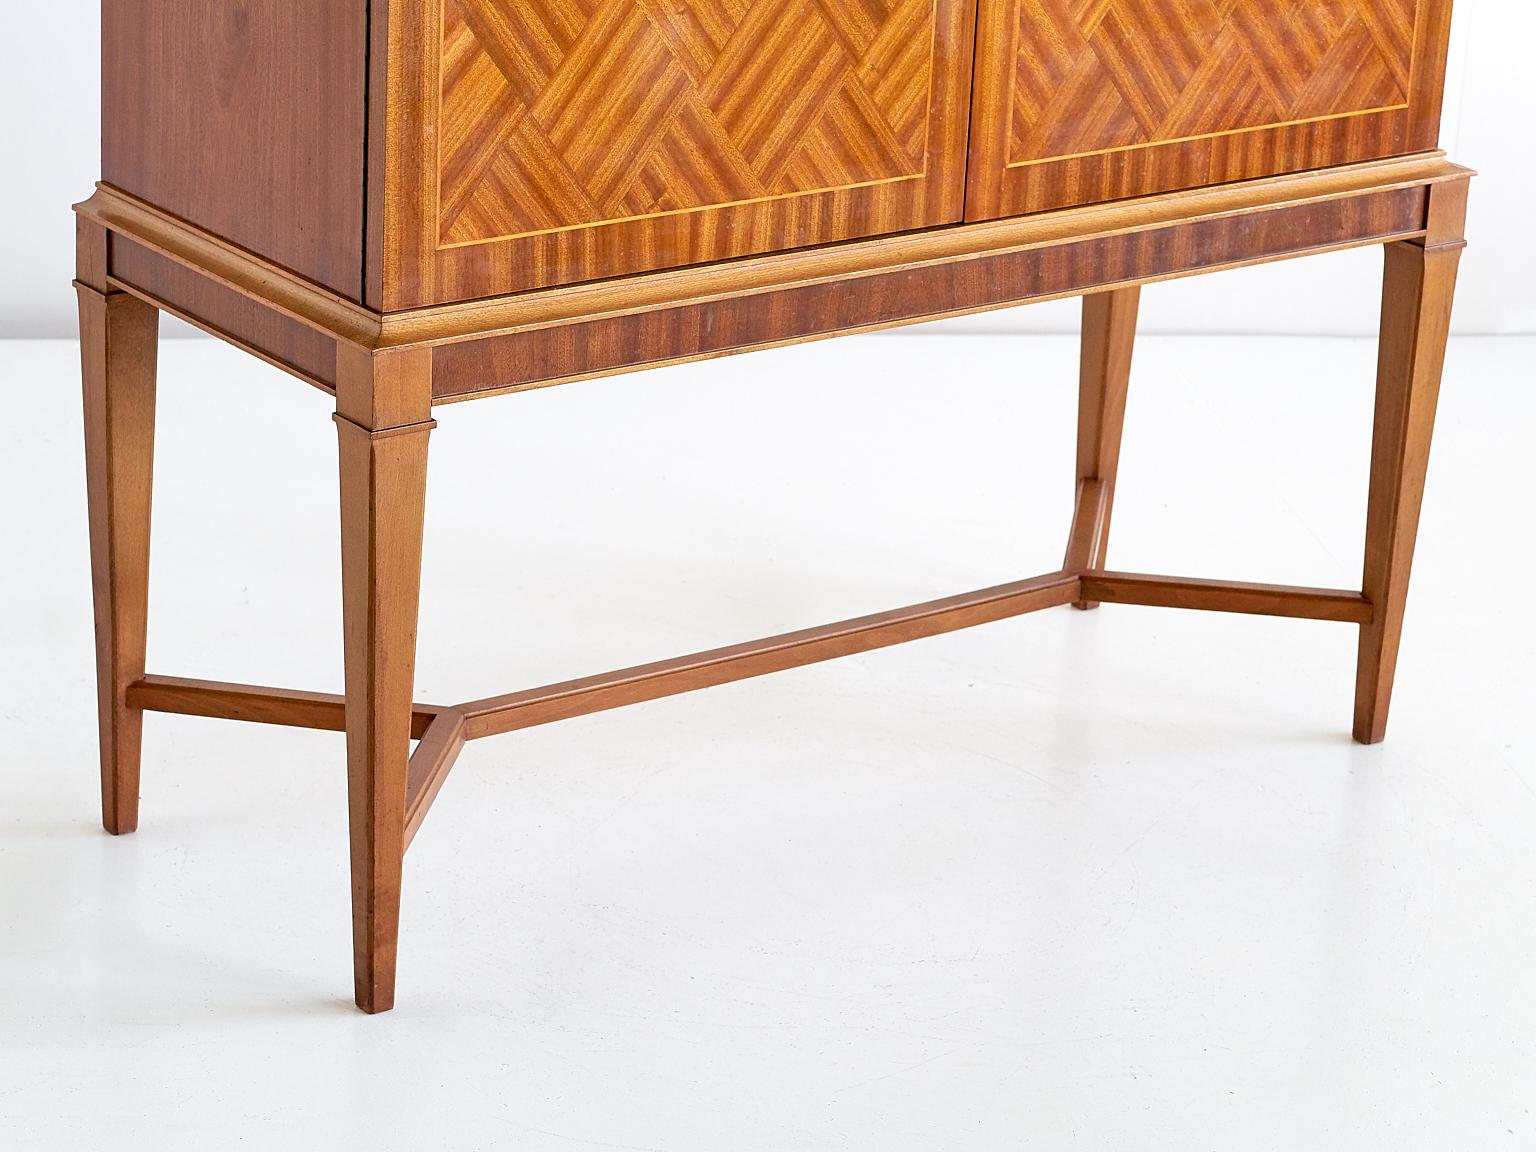 Glass Carl-Axel Acking Attributed Bar Cabinet with Geometric Mahogany Inlay, 1940s